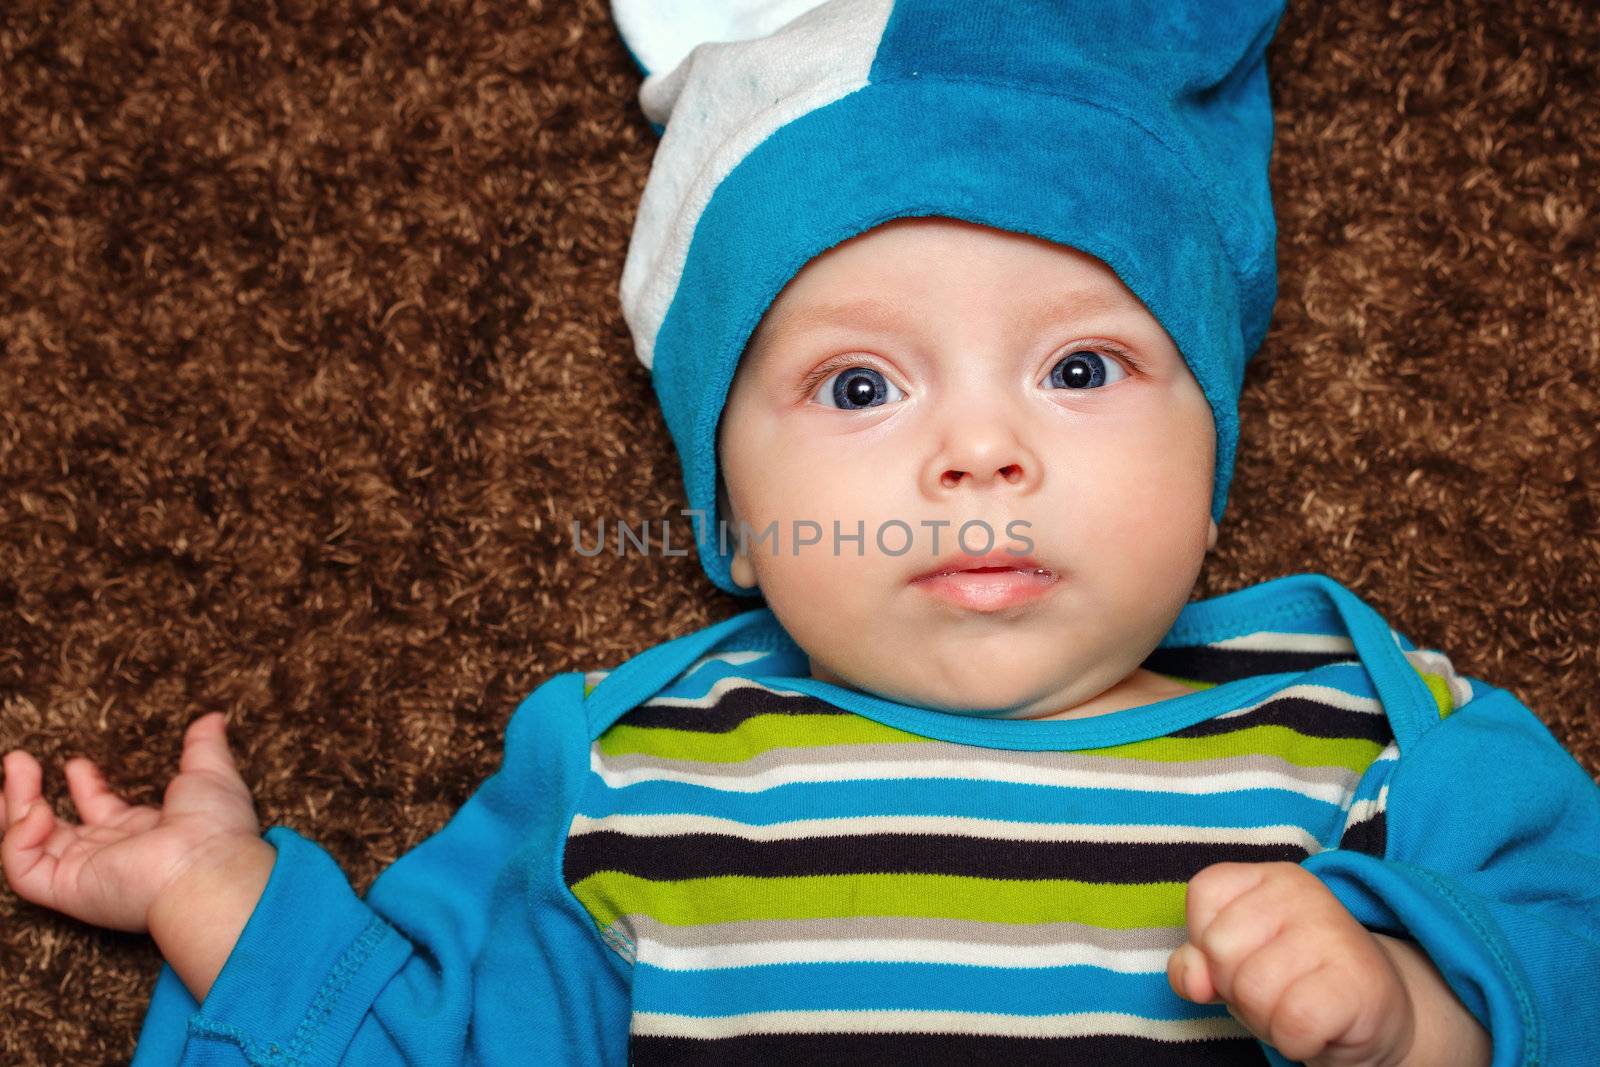 Blue-eyed baby lies on his back and smiling while looking at the camera